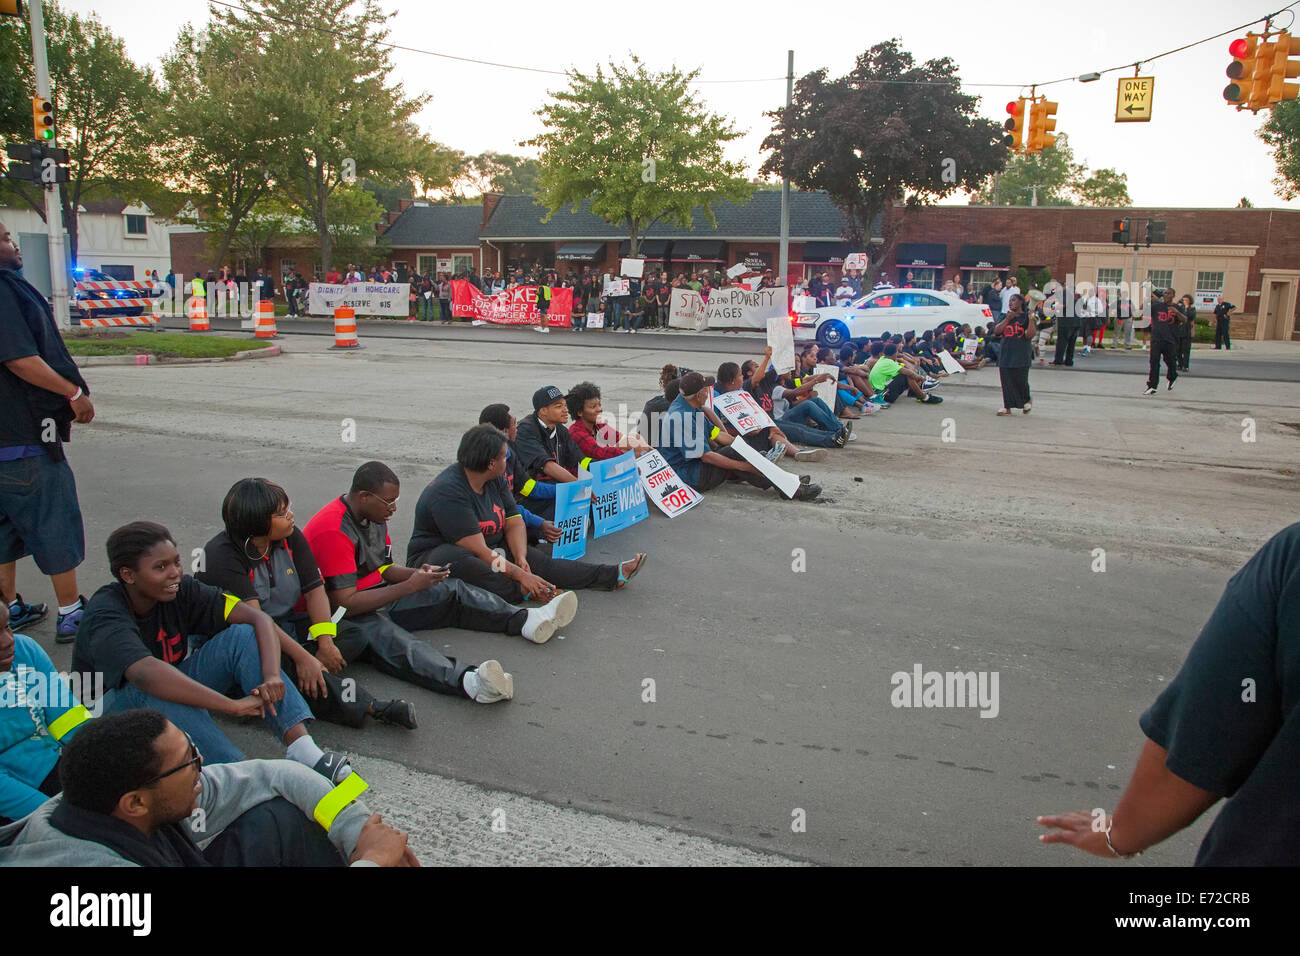 Detroit, Michigan, US. Fast food workers and supporters picketed a McDonald's restaurant and blocked traffic on Mack Avenue, demanding a higher wage of $15 an hour. Several dozen workers were arrested. Credit:  Jim West/Alamy Live News Stock Photo